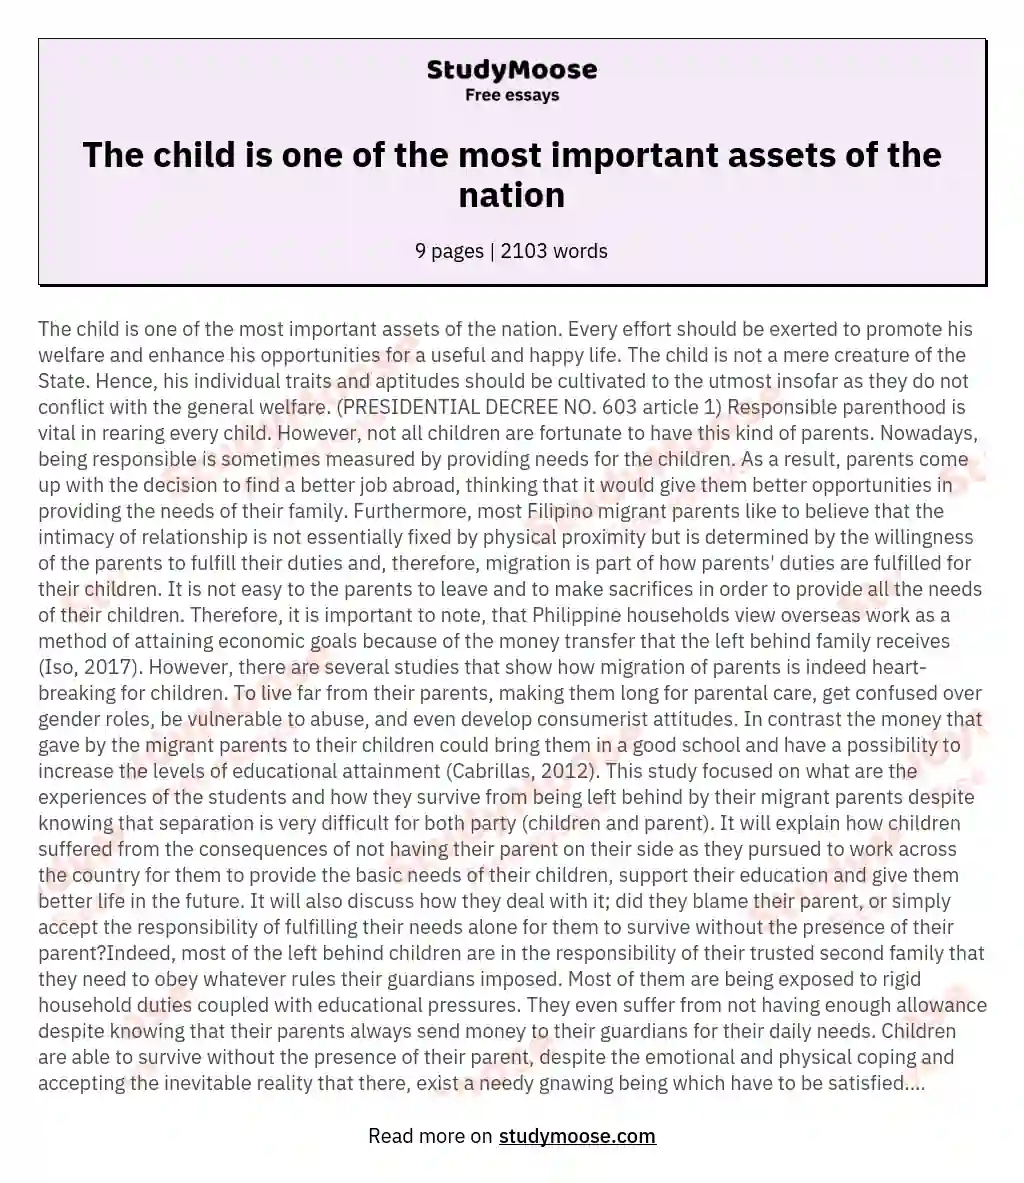 The child is one of the most important assets of the nation essay